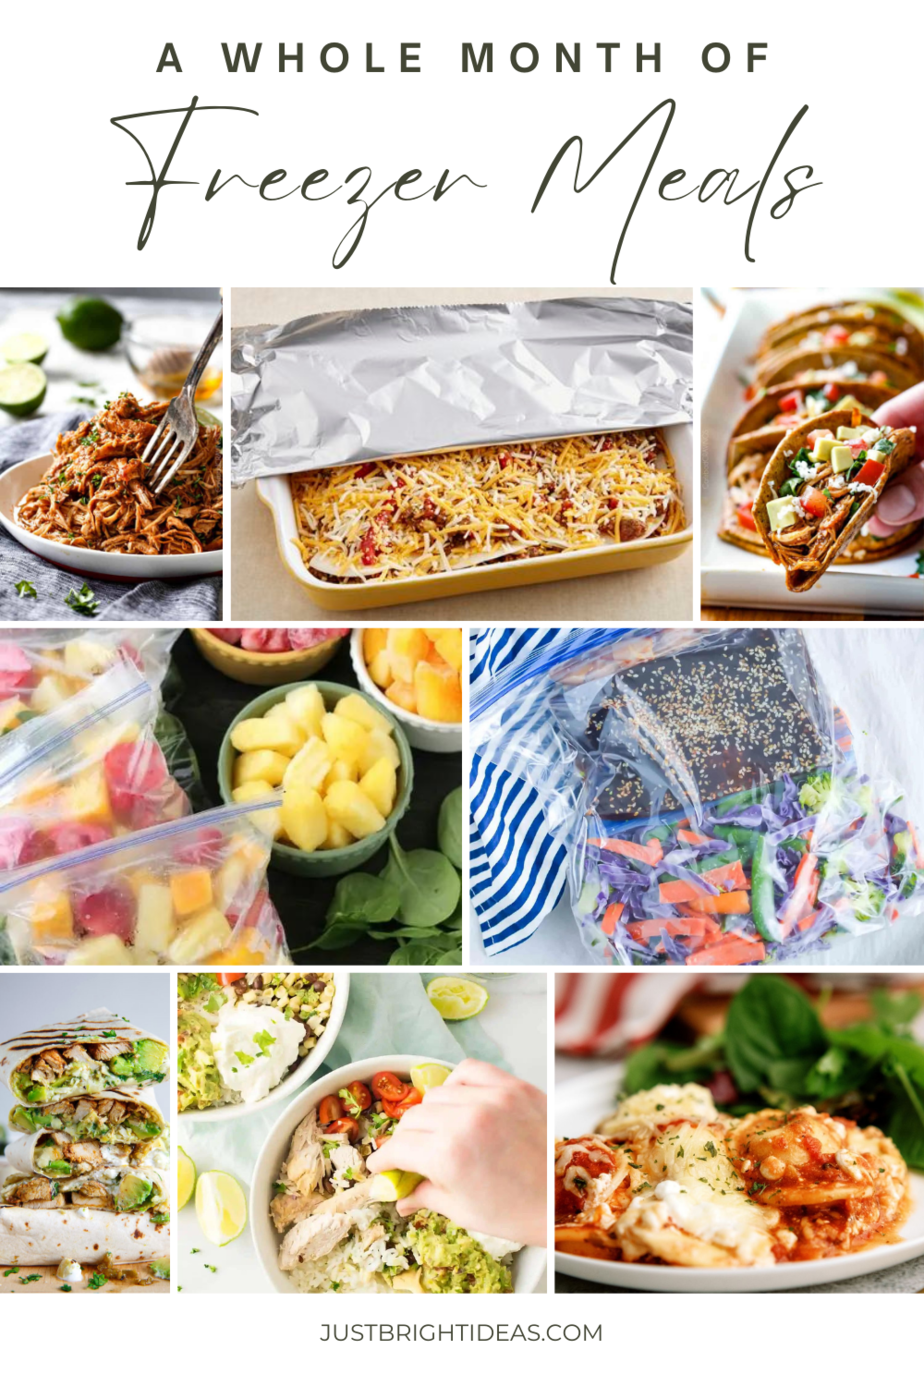 🍲 Freezer meals for the win! 🙌 Say goodbye to dinner dilemmas with our collection of 30 make-ahead masterpieces! 🌟 From cozy casseroles to flavorful soups, we've got your weeknights covered. Prep, freeze, and enjoy stress-free dinners all week long! 🥘✨ #FreezerMeals #MealPrepMagic #EasyDinnerIdeas